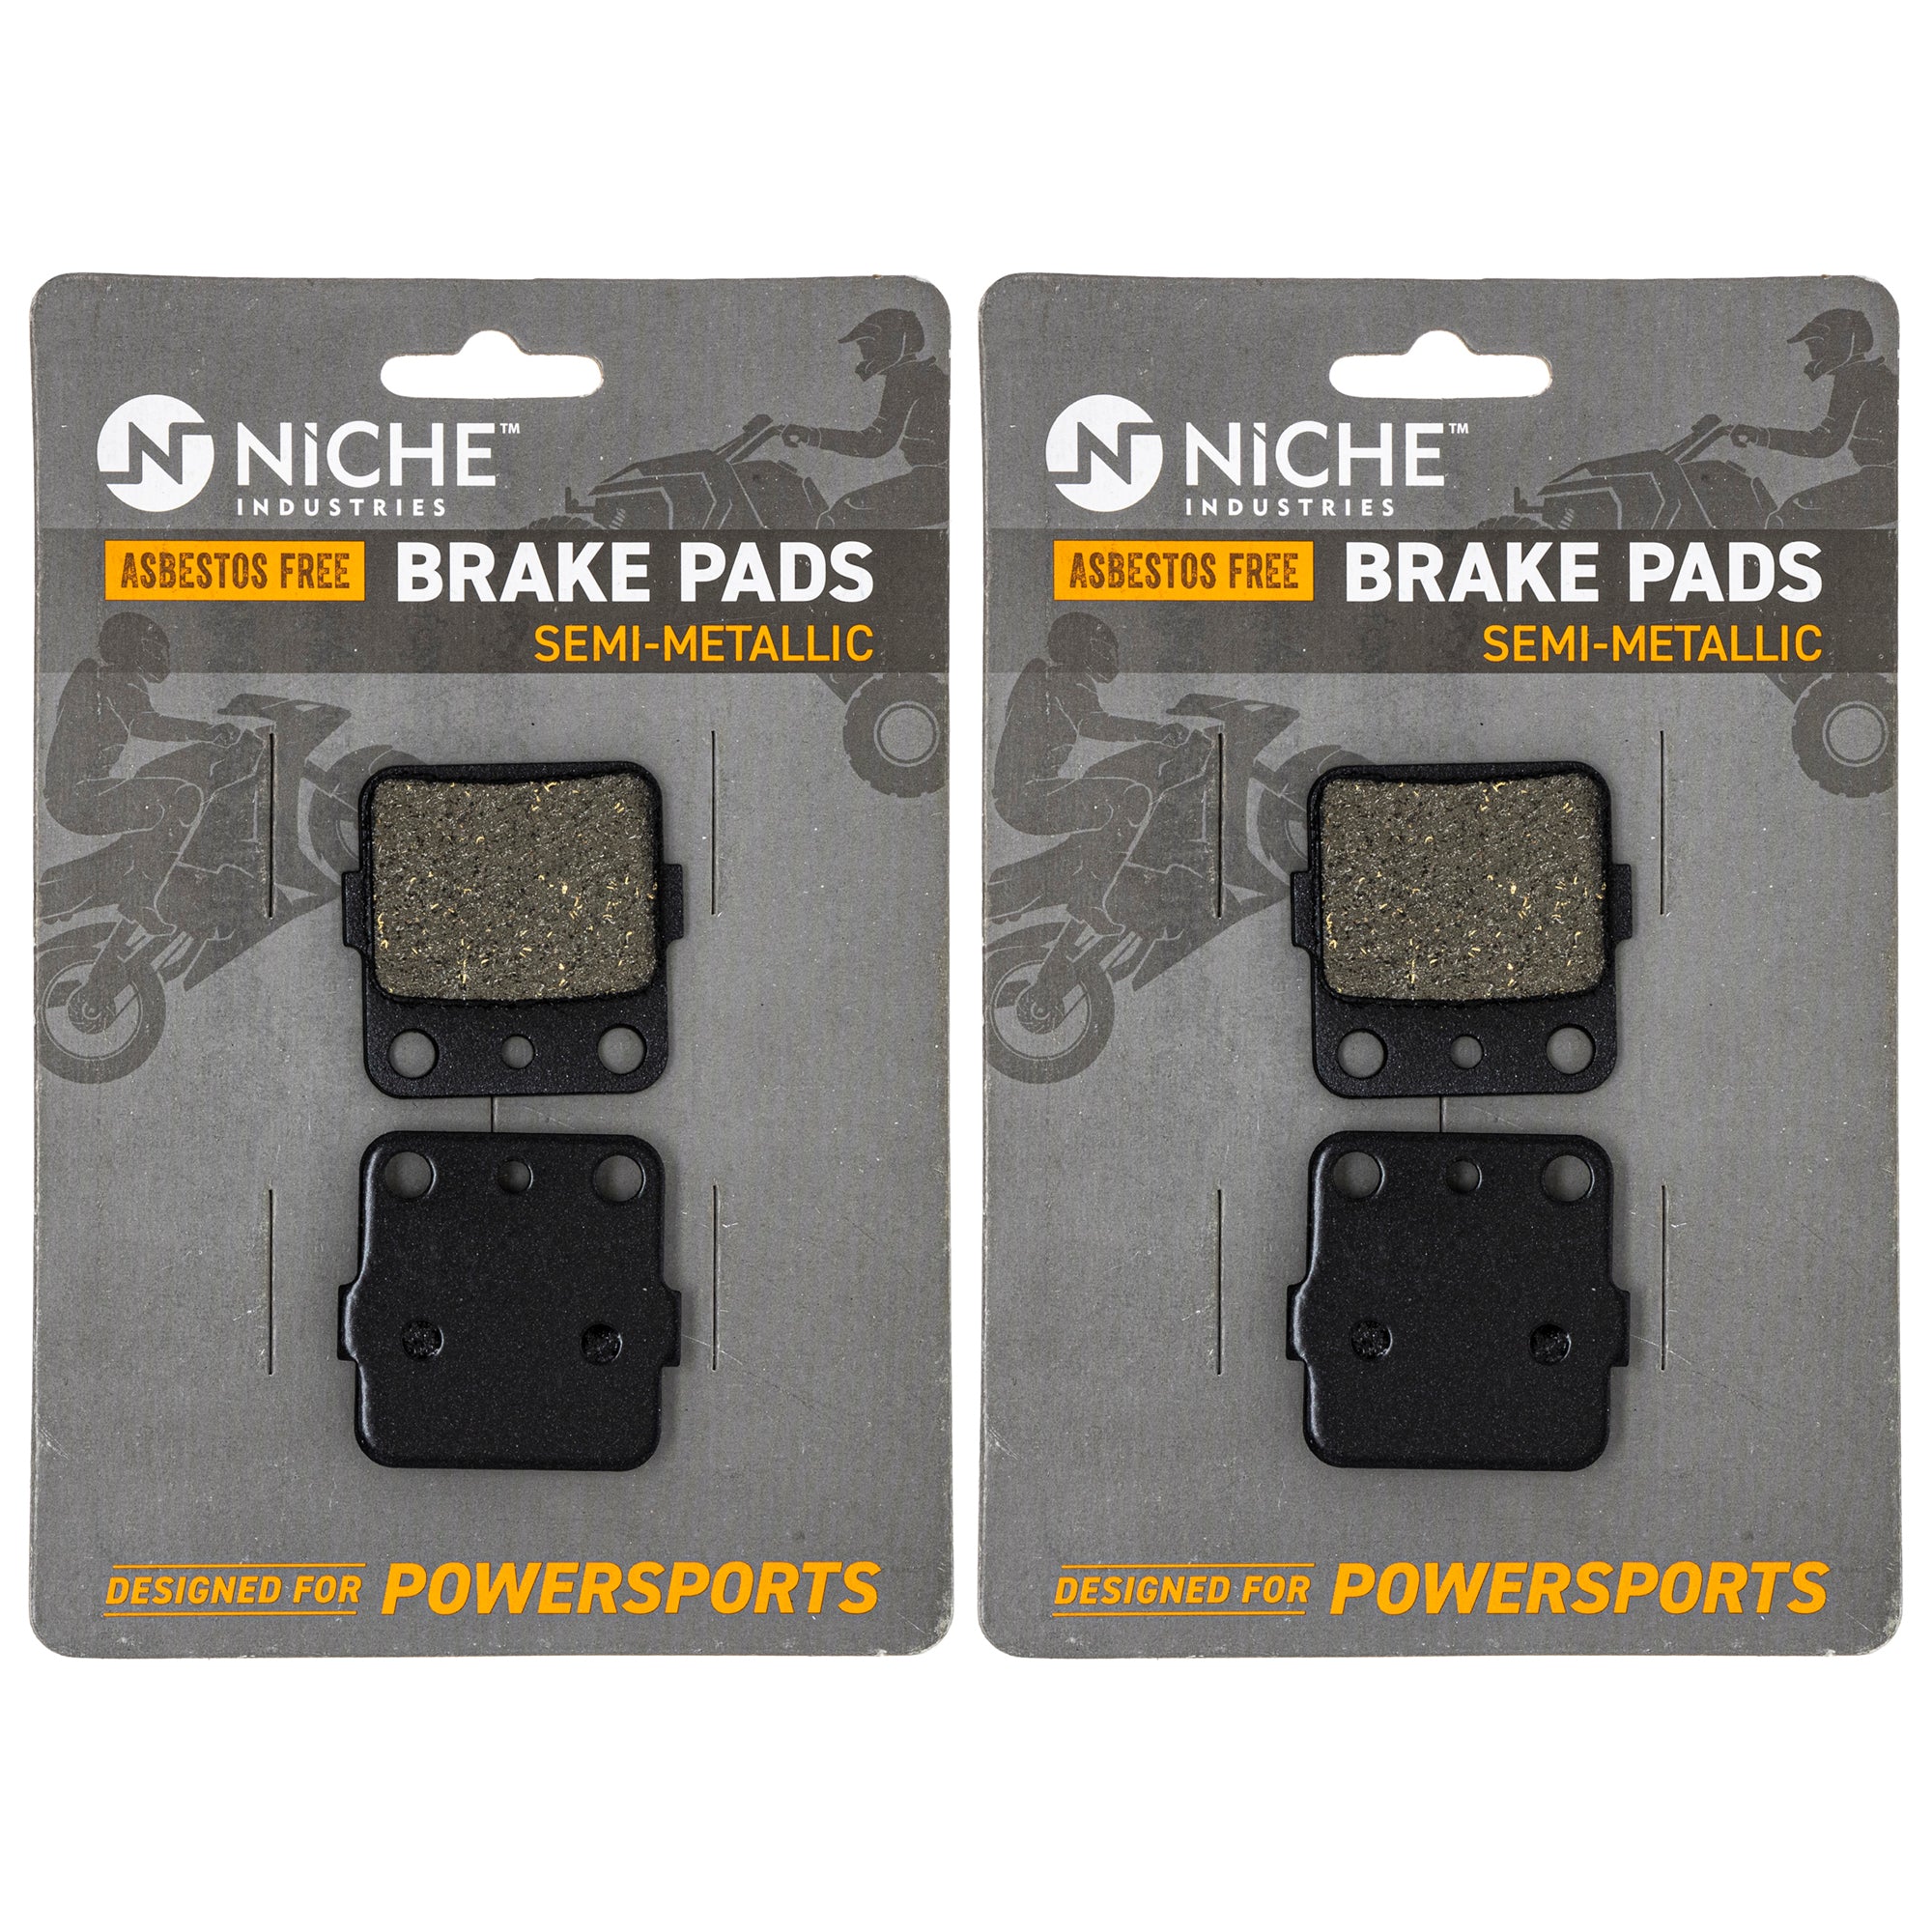 NICHE MK1001507 Brake Pad Set for zOTHER Yamaha Grizzly